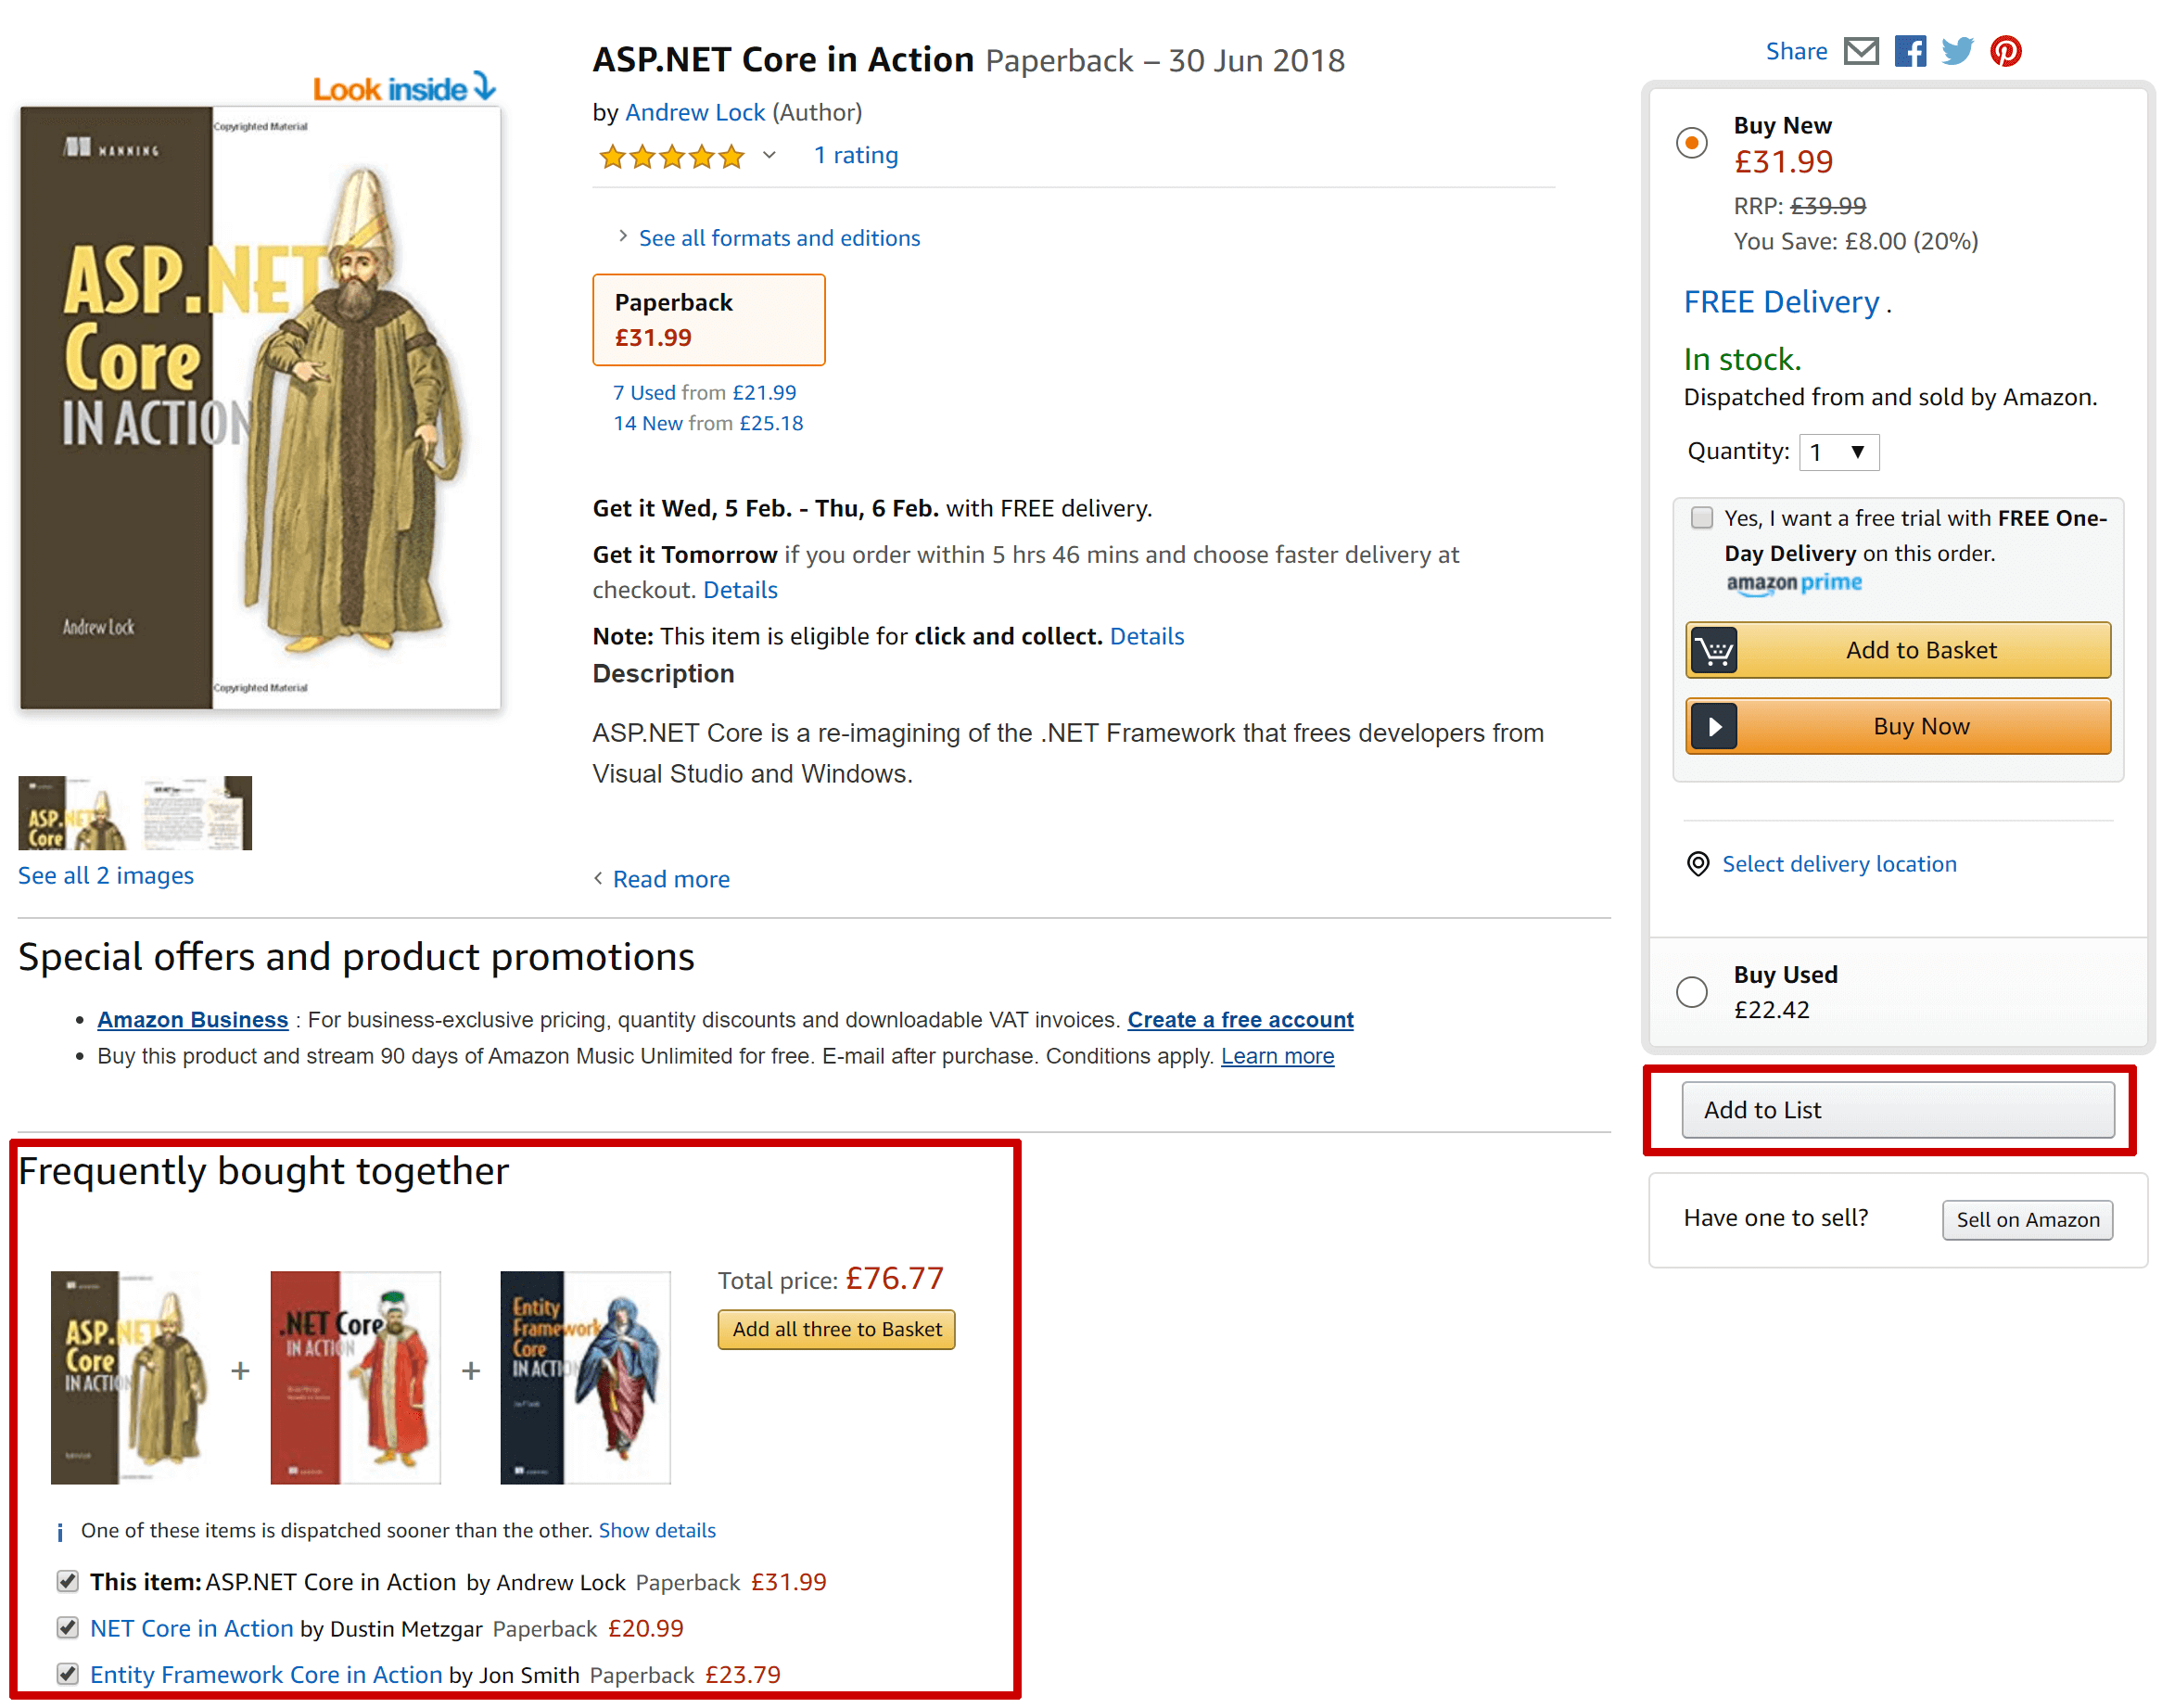 A product page from Amazon.co.uk